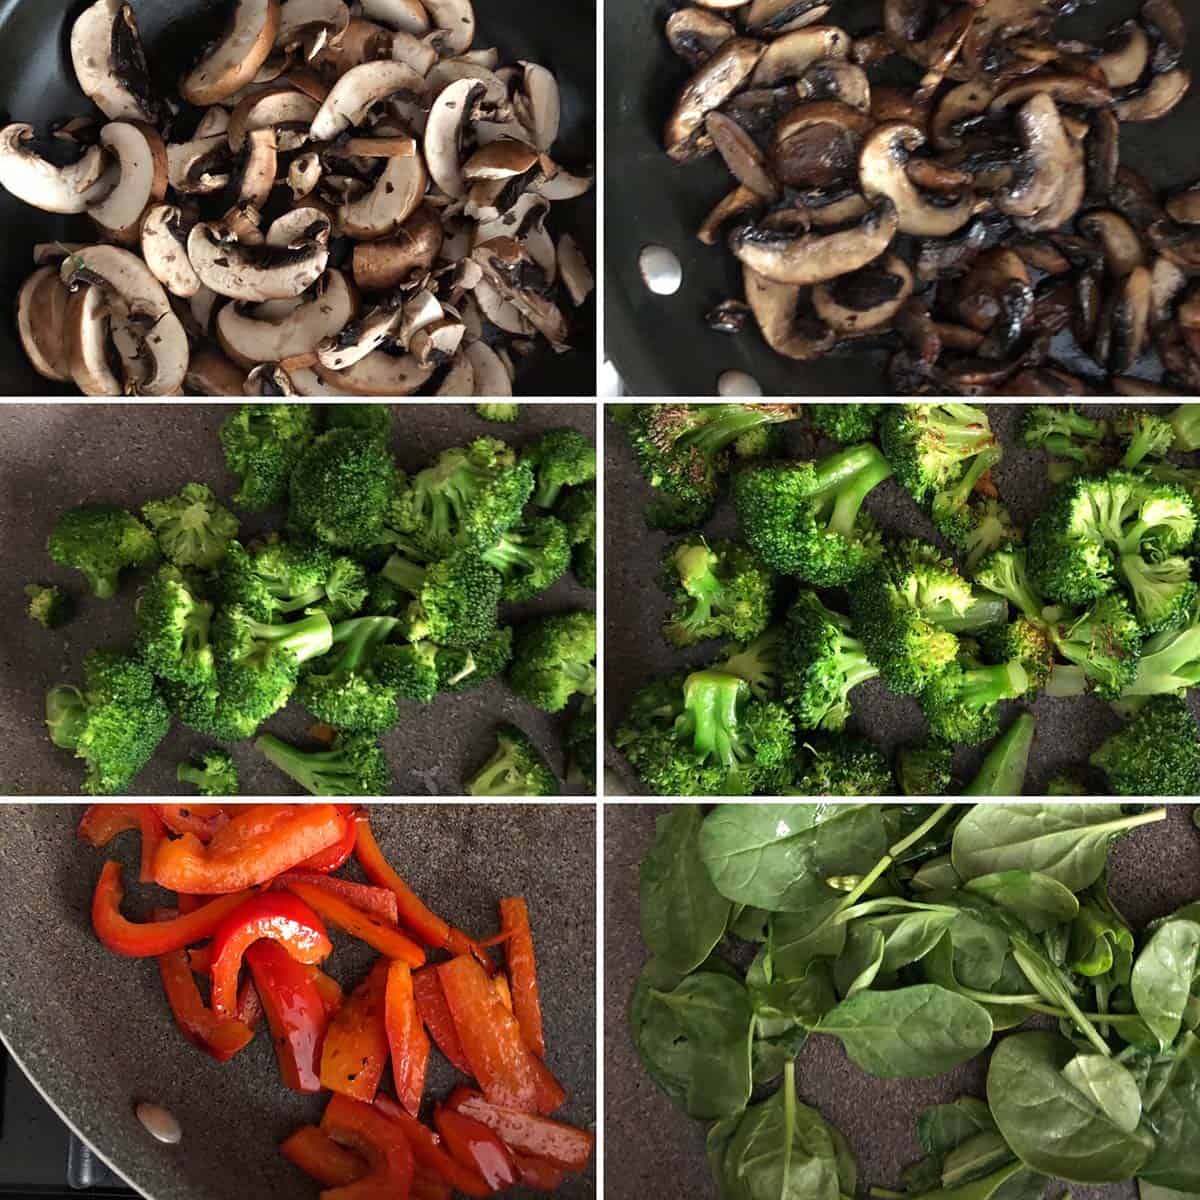 6 panel photo showing the sautéing of vegetables.